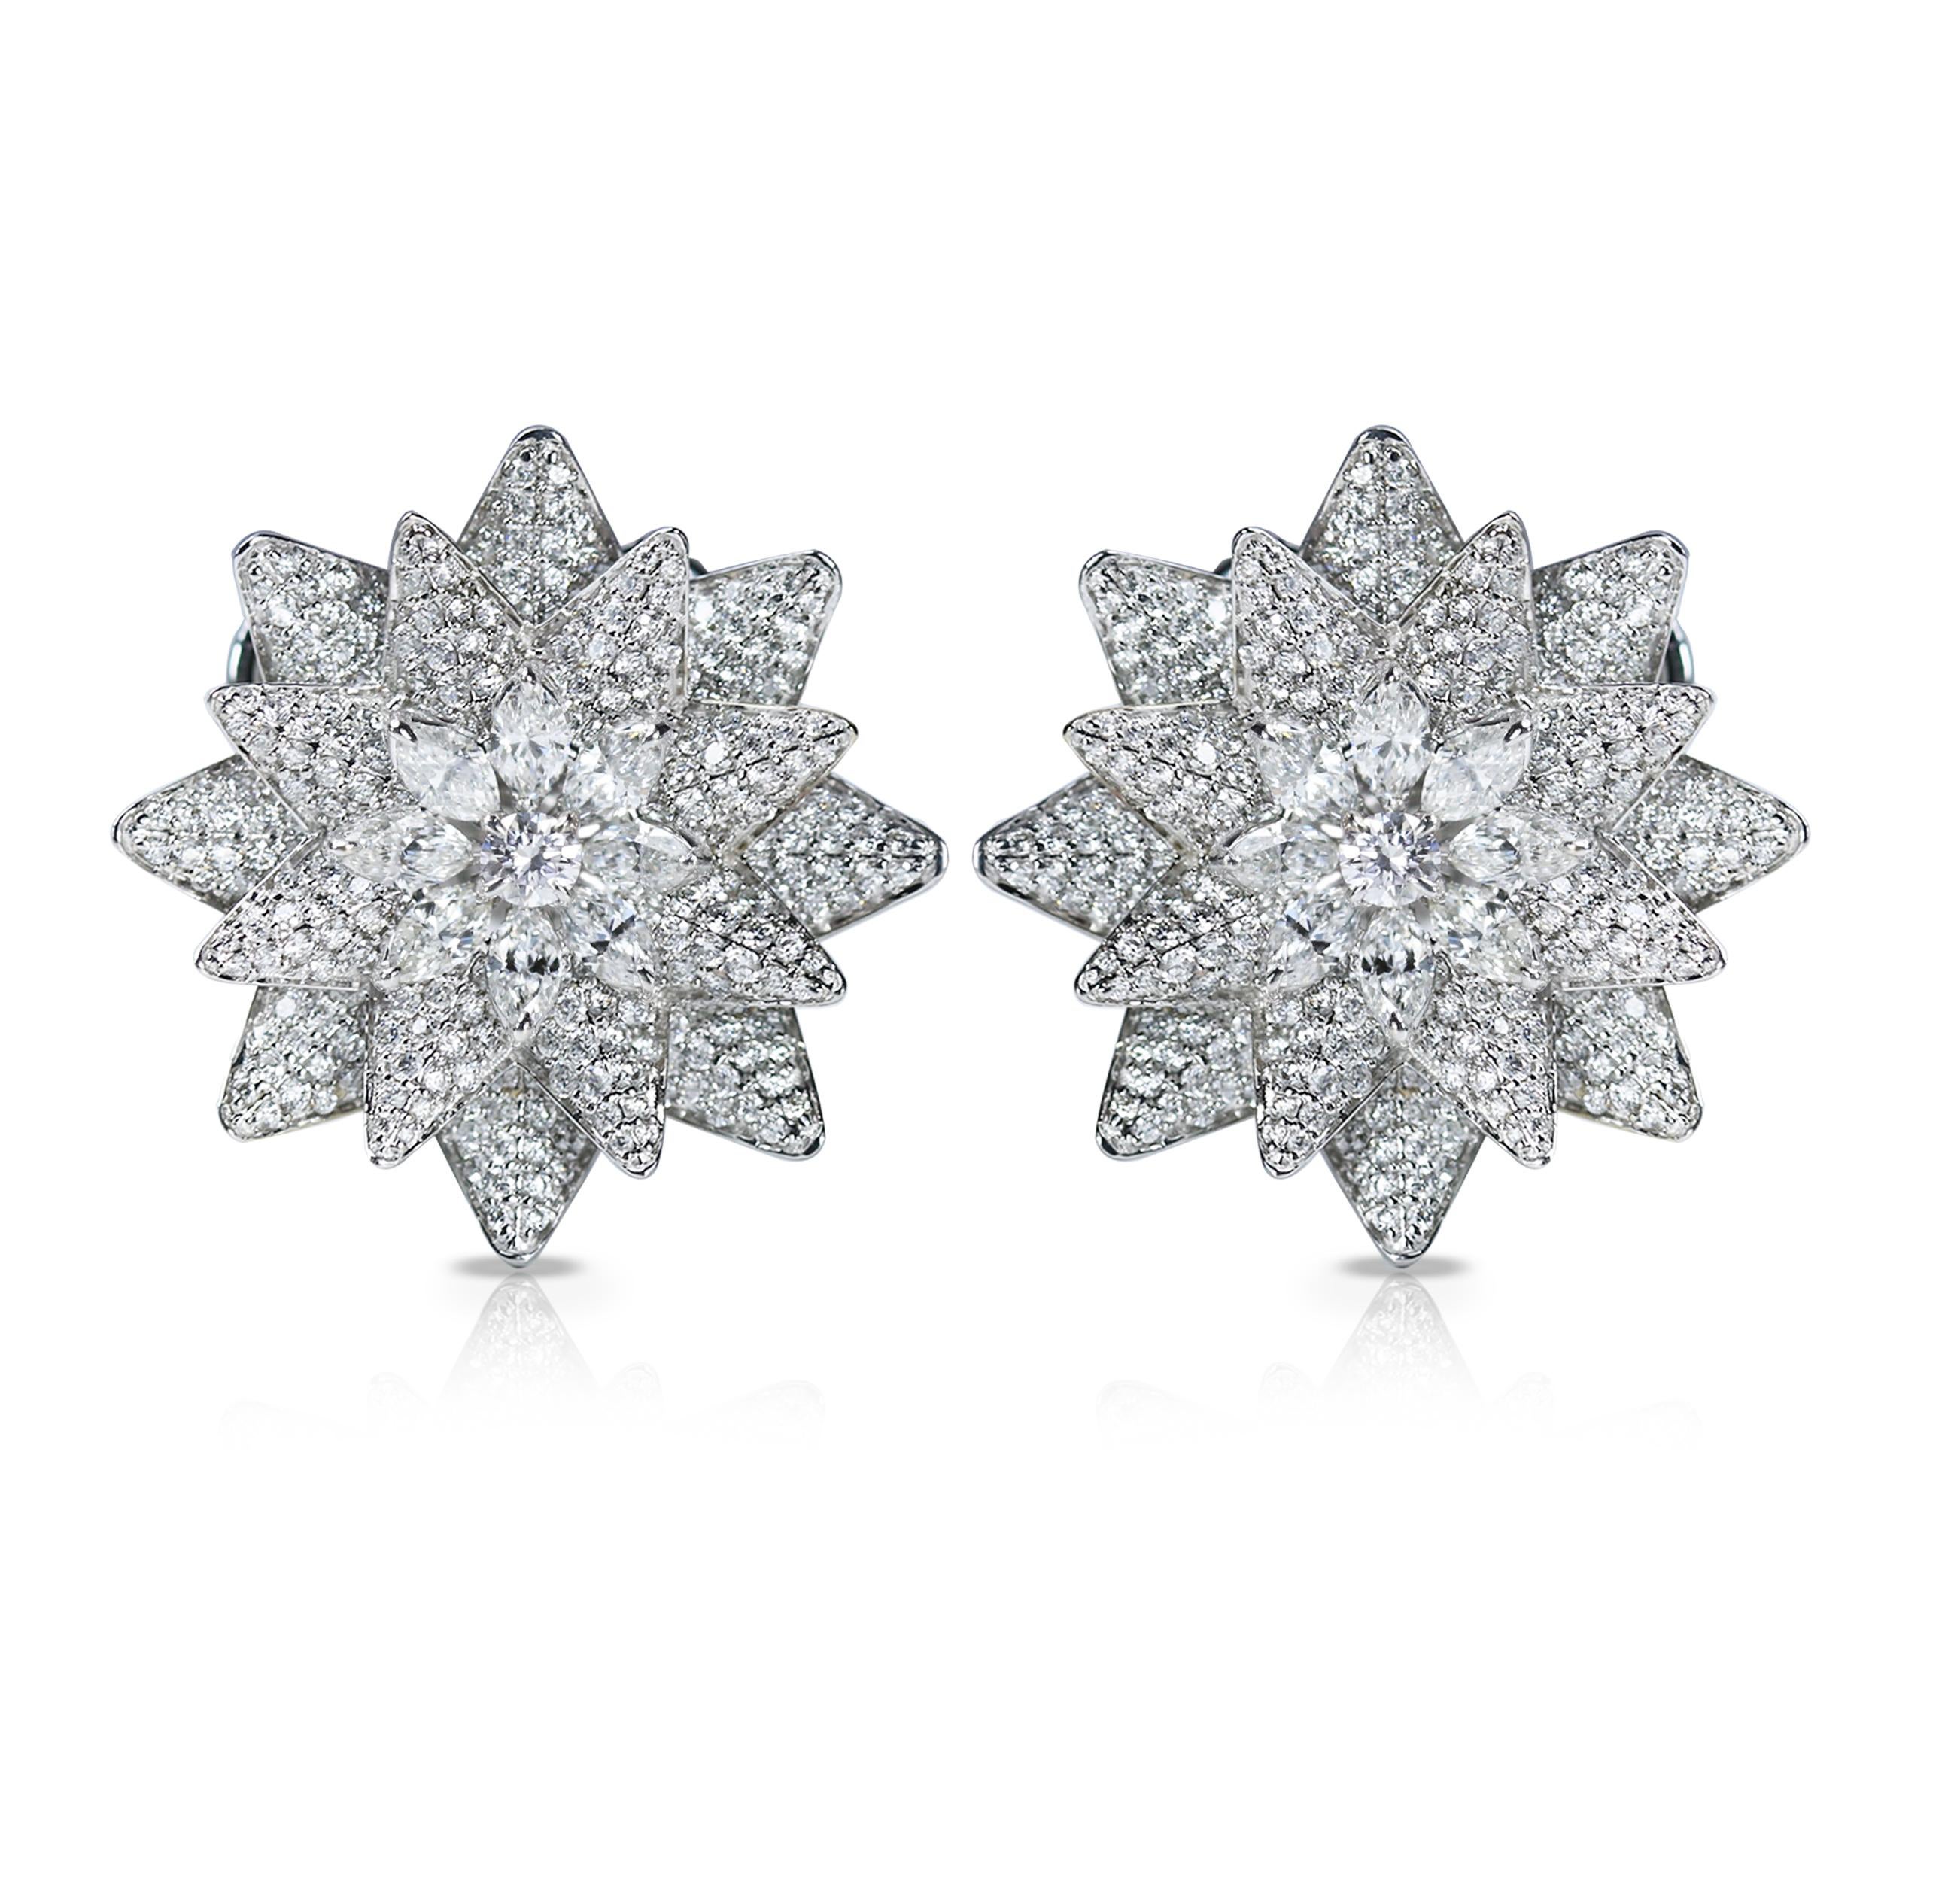 G-H/ VS-SI brilliant cut diamond earrings

An exemplary floral arrangement takes centre stage in this arresting pair of 18K white gold earrings adorned with G-H/ VS-SI brilliant cut diamonds. Such is the design that the pair is a keepsake in a